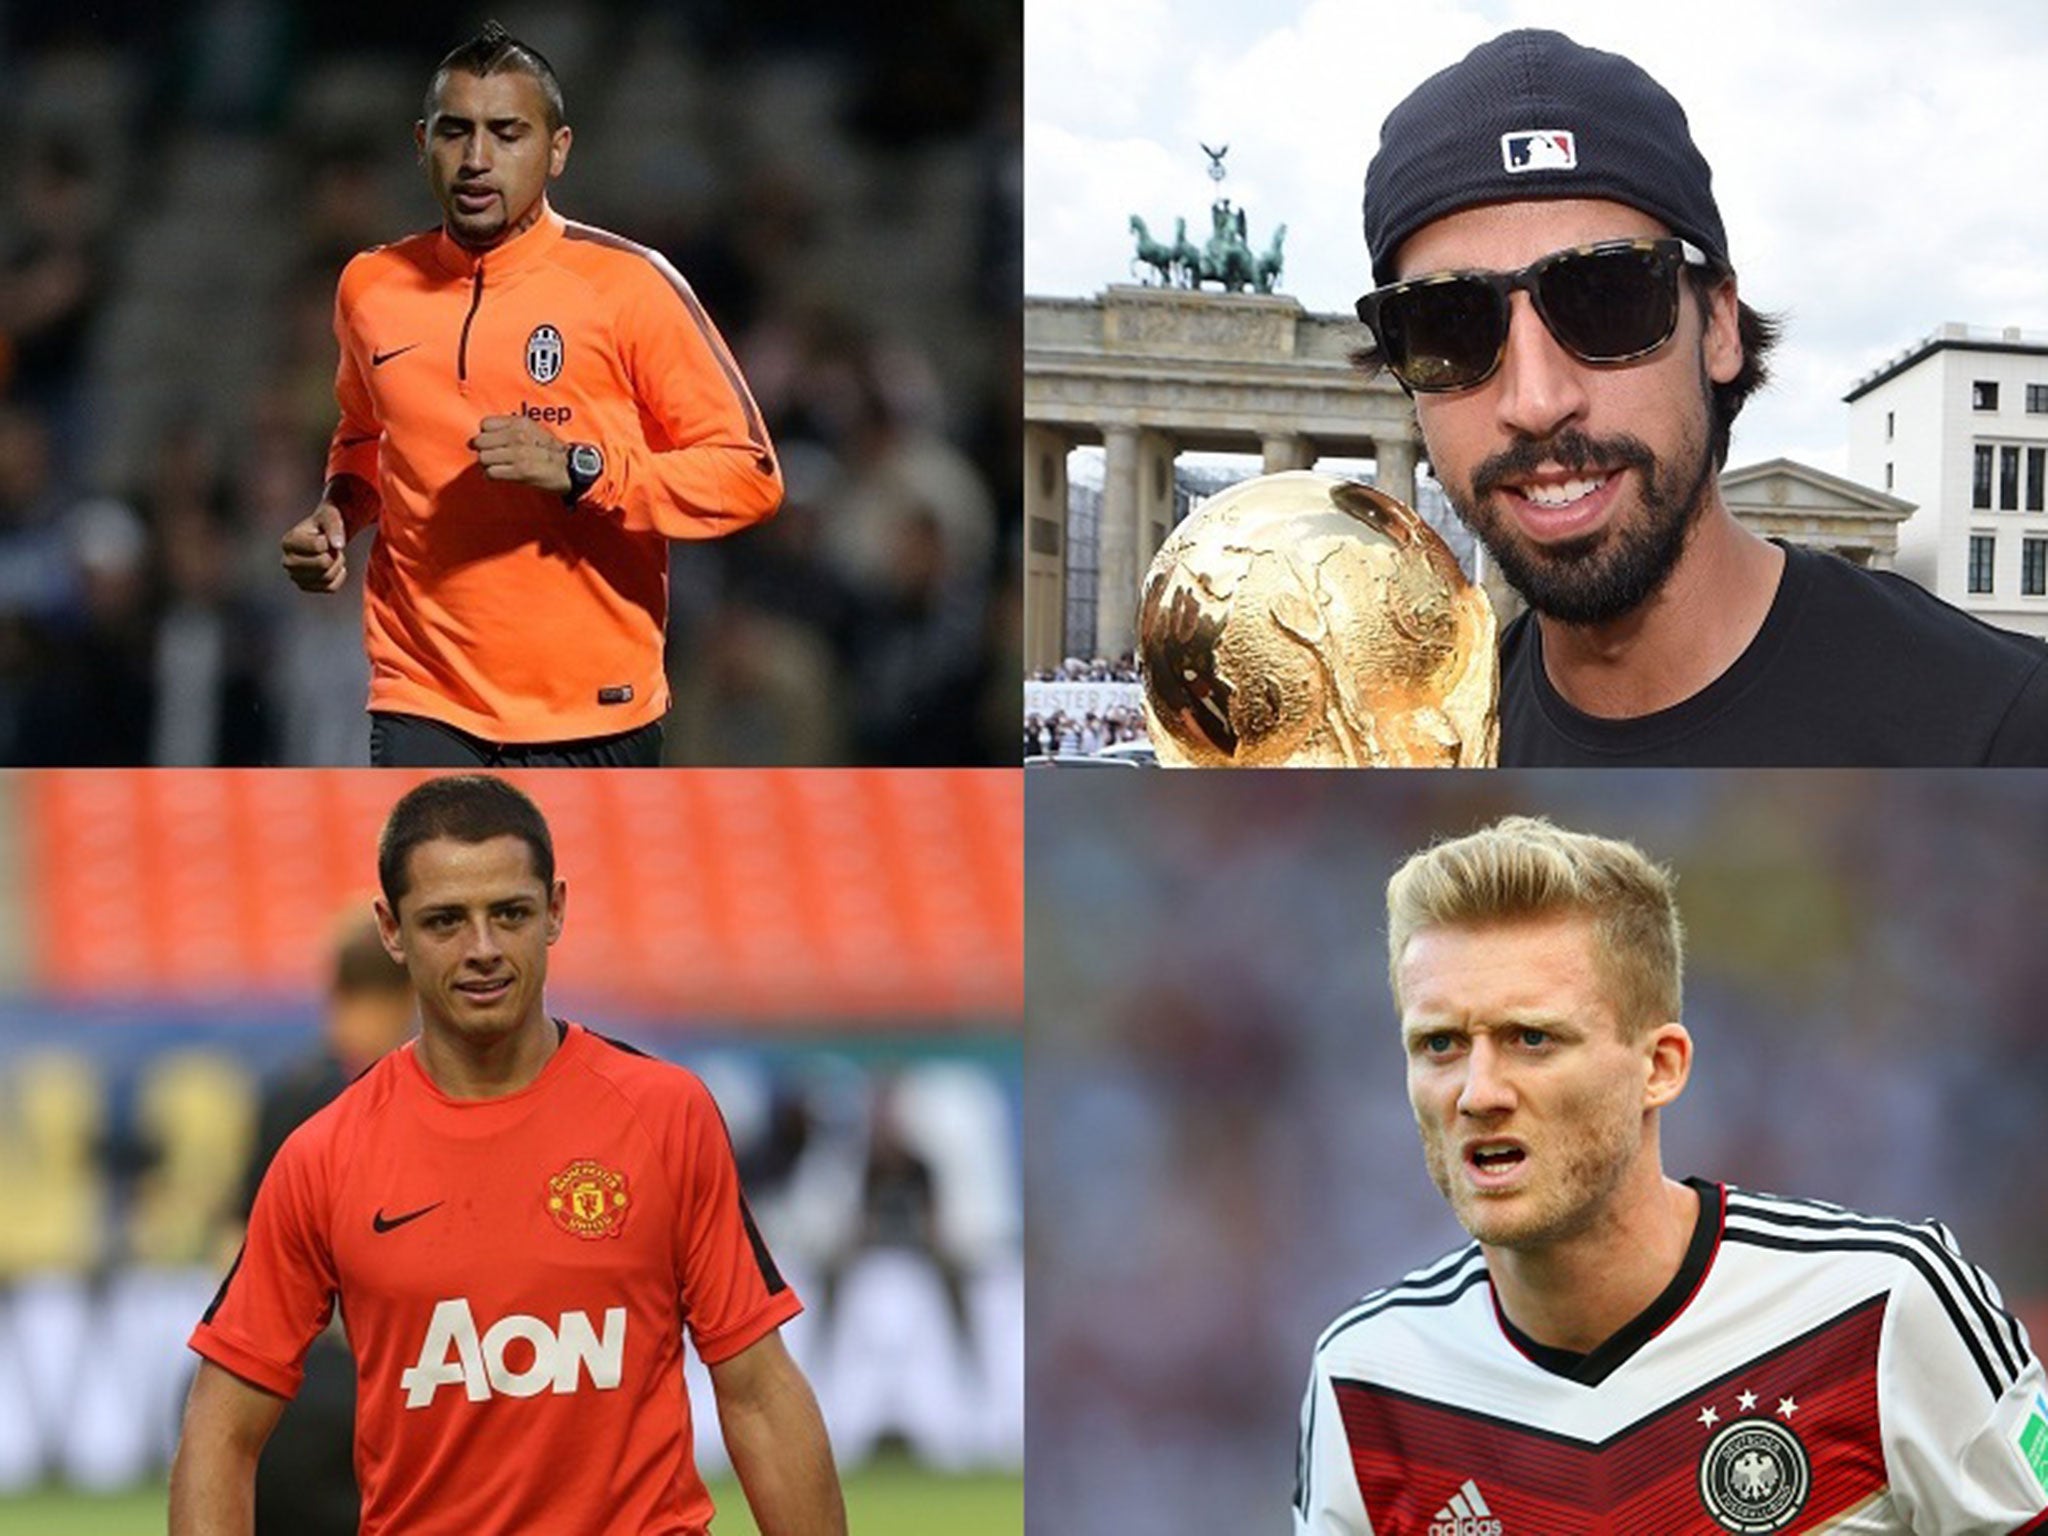 Manchester United may get Arturo Vidal in swap deal as Sami Khedira's time at Real Madrid nears its end